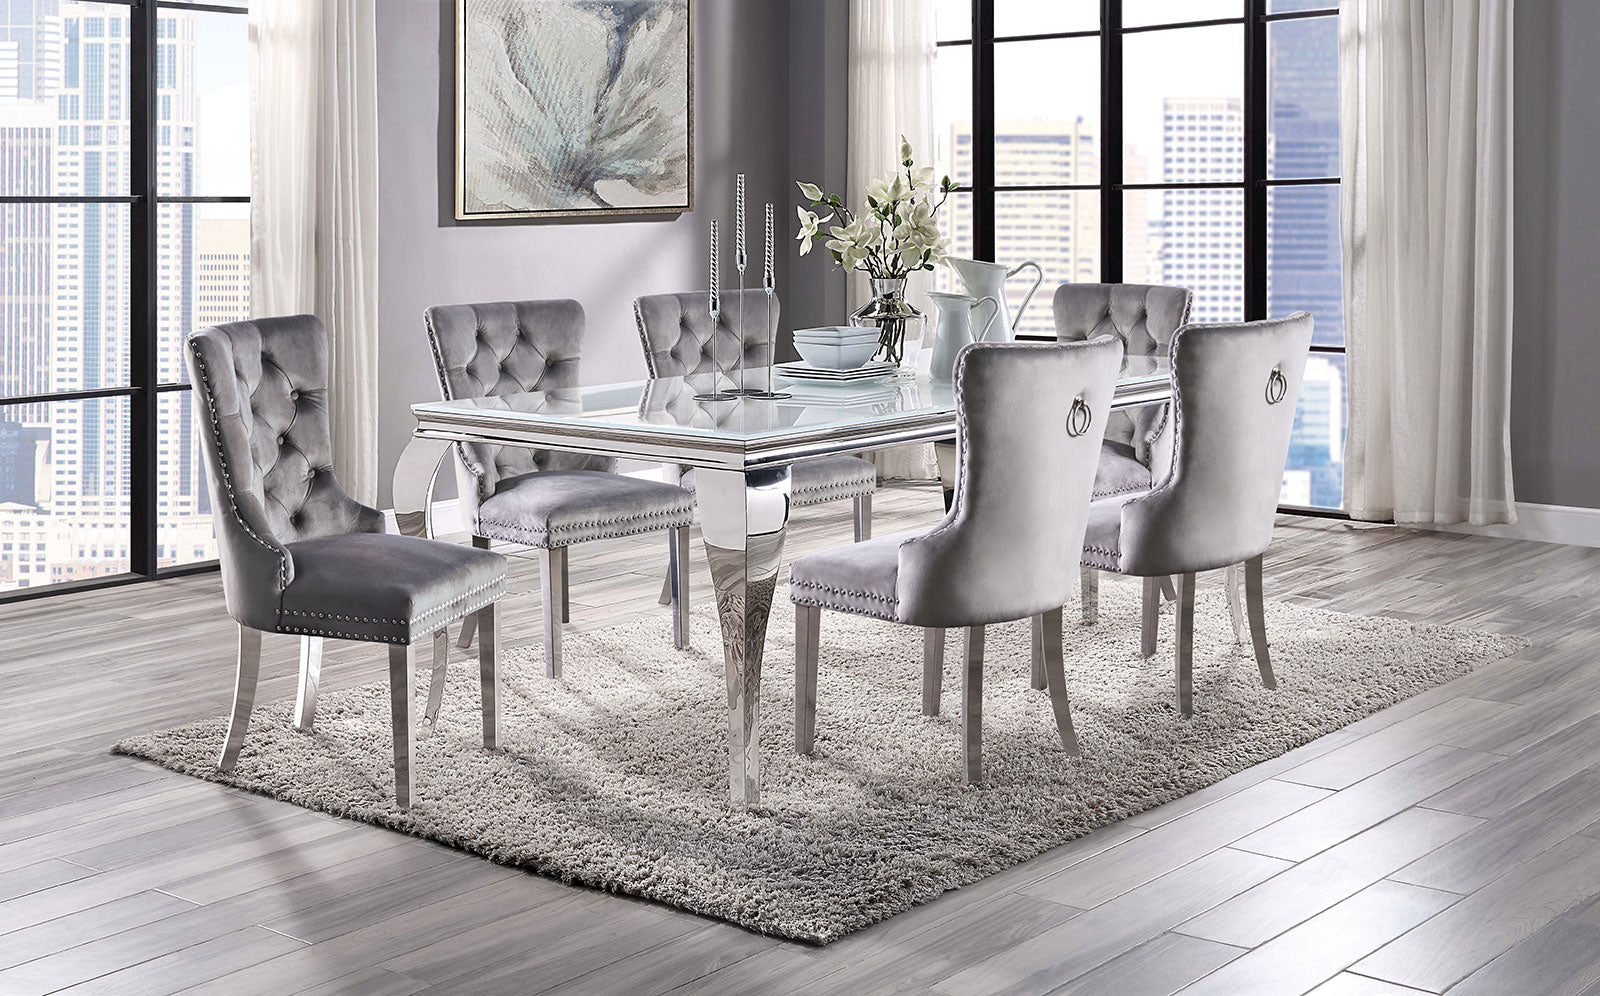 NEUVEVILLE 7 Pc. Dining Table Set, Gray Chairs